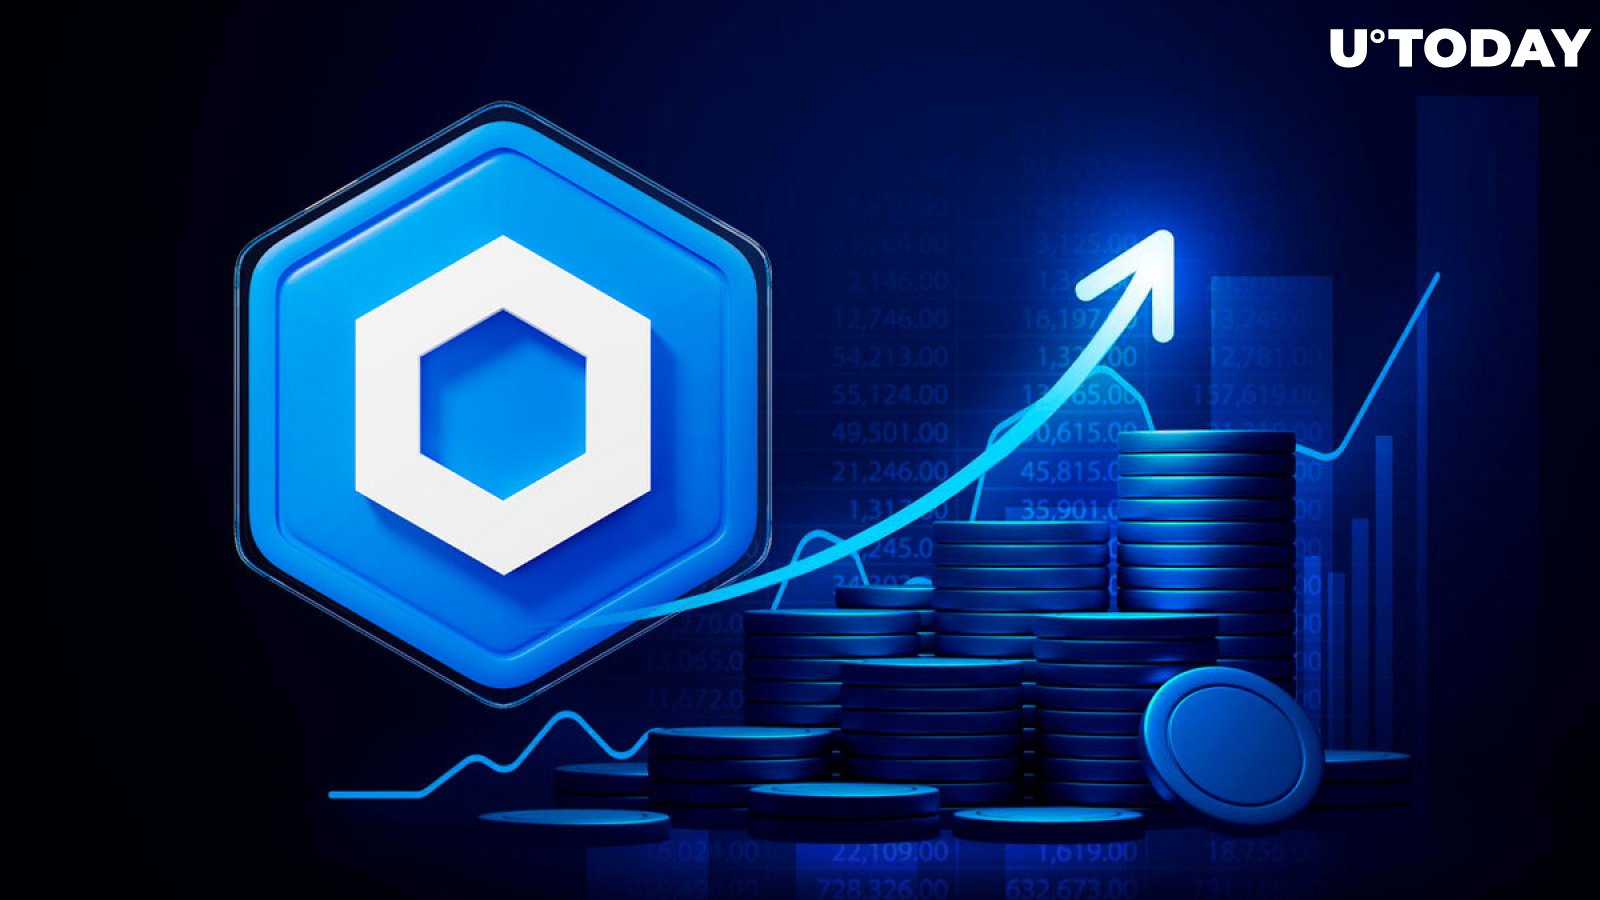 Chainlink (LINK) Surges 40% in Week: Insider Reveals Real Reasons Why